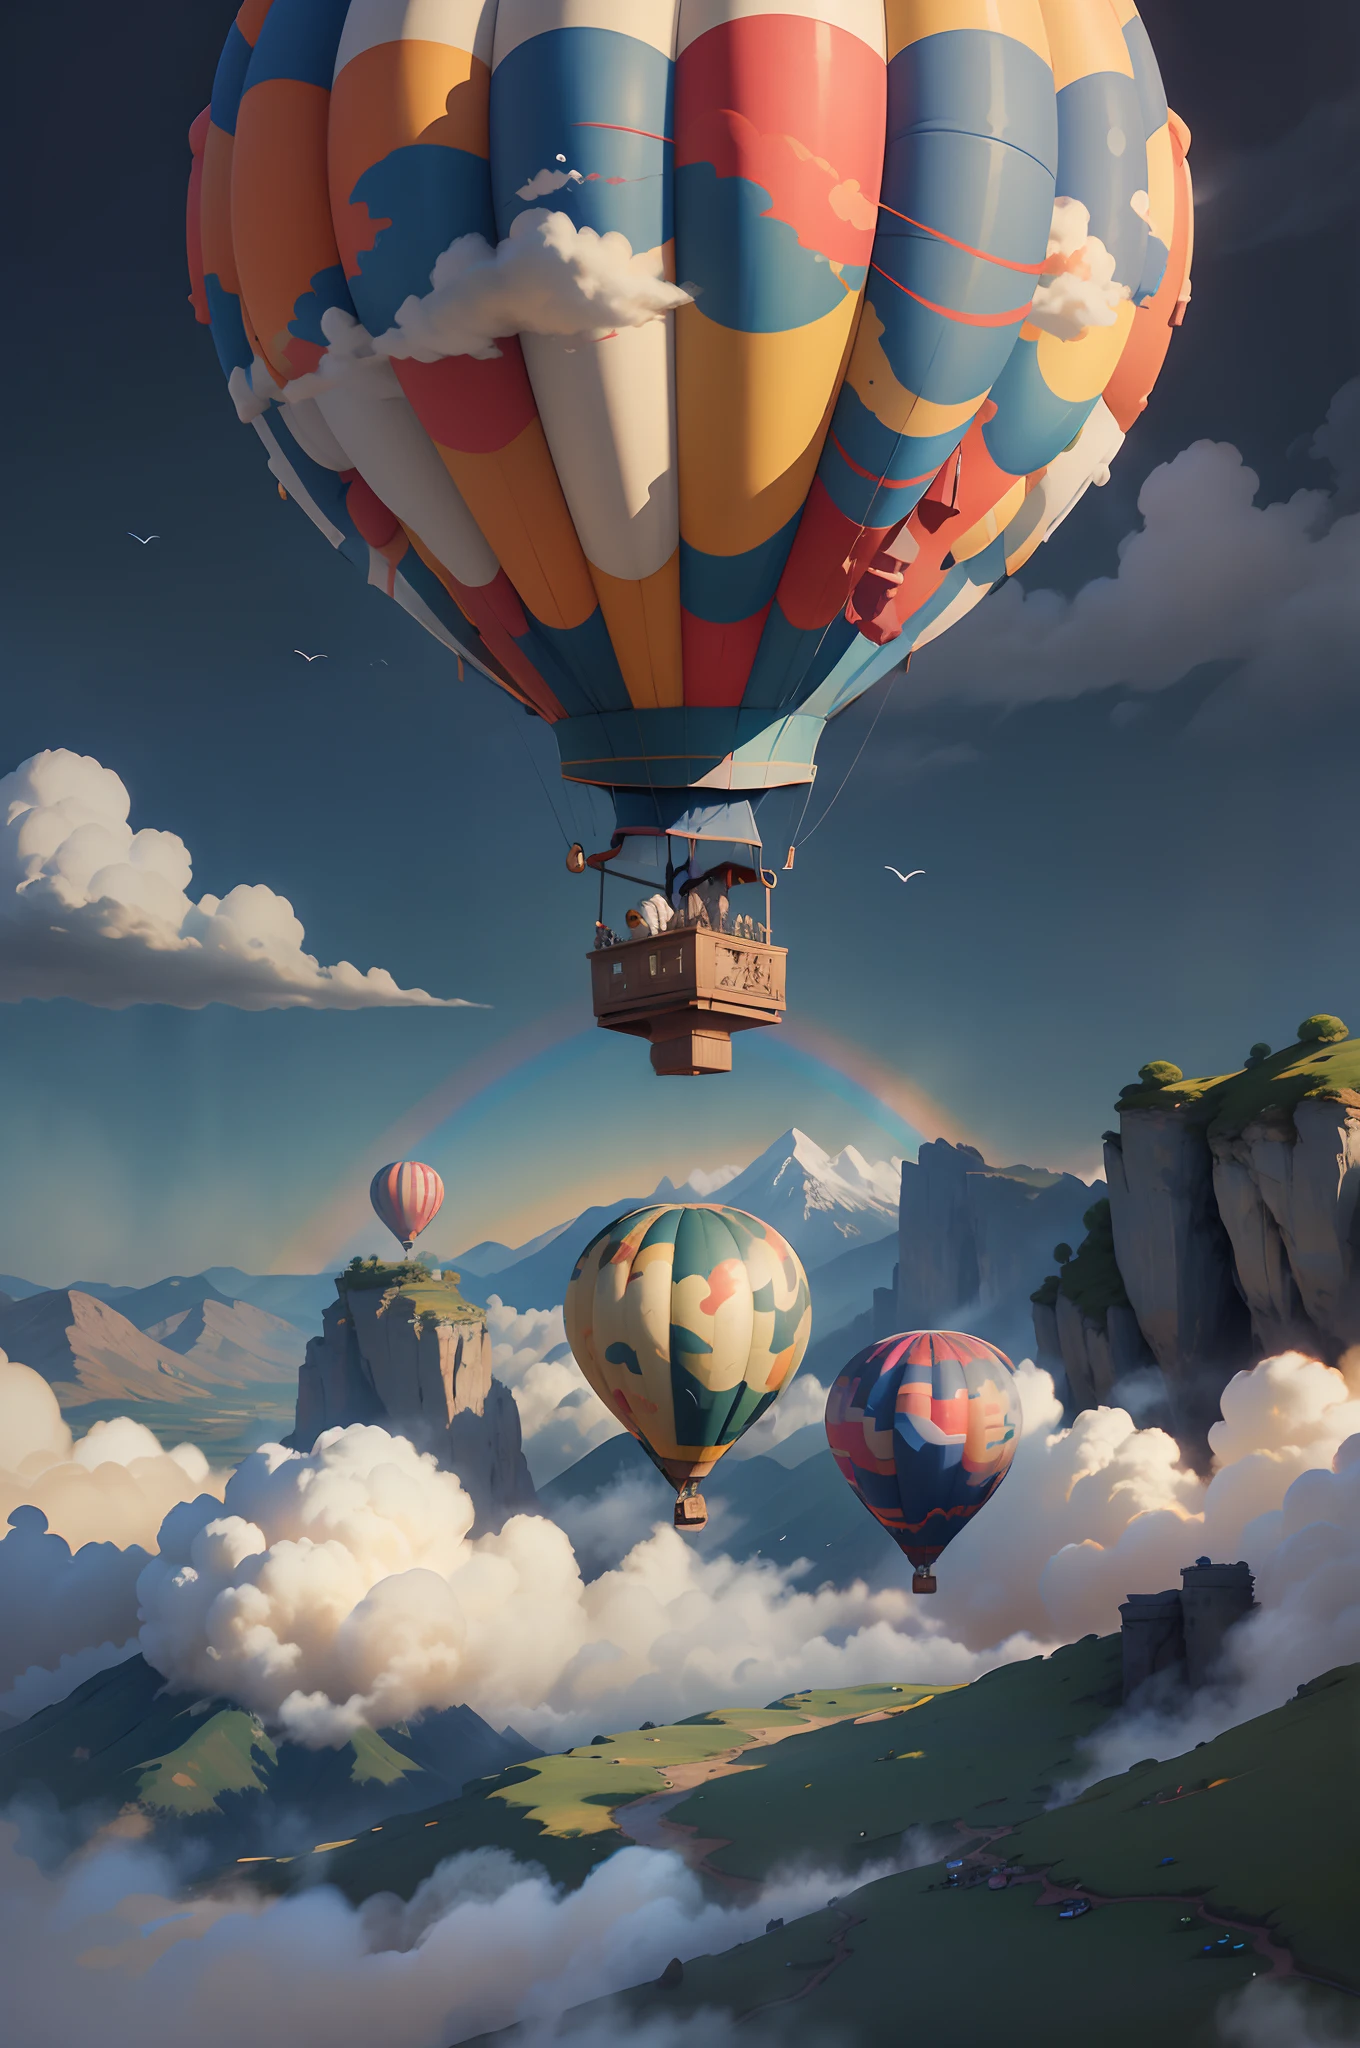 Detail elements：Colorful hot air balloons、Fluttering cloudountains in the distant、Soaring birds、Sun-drenched meadows、Splendid rainbow